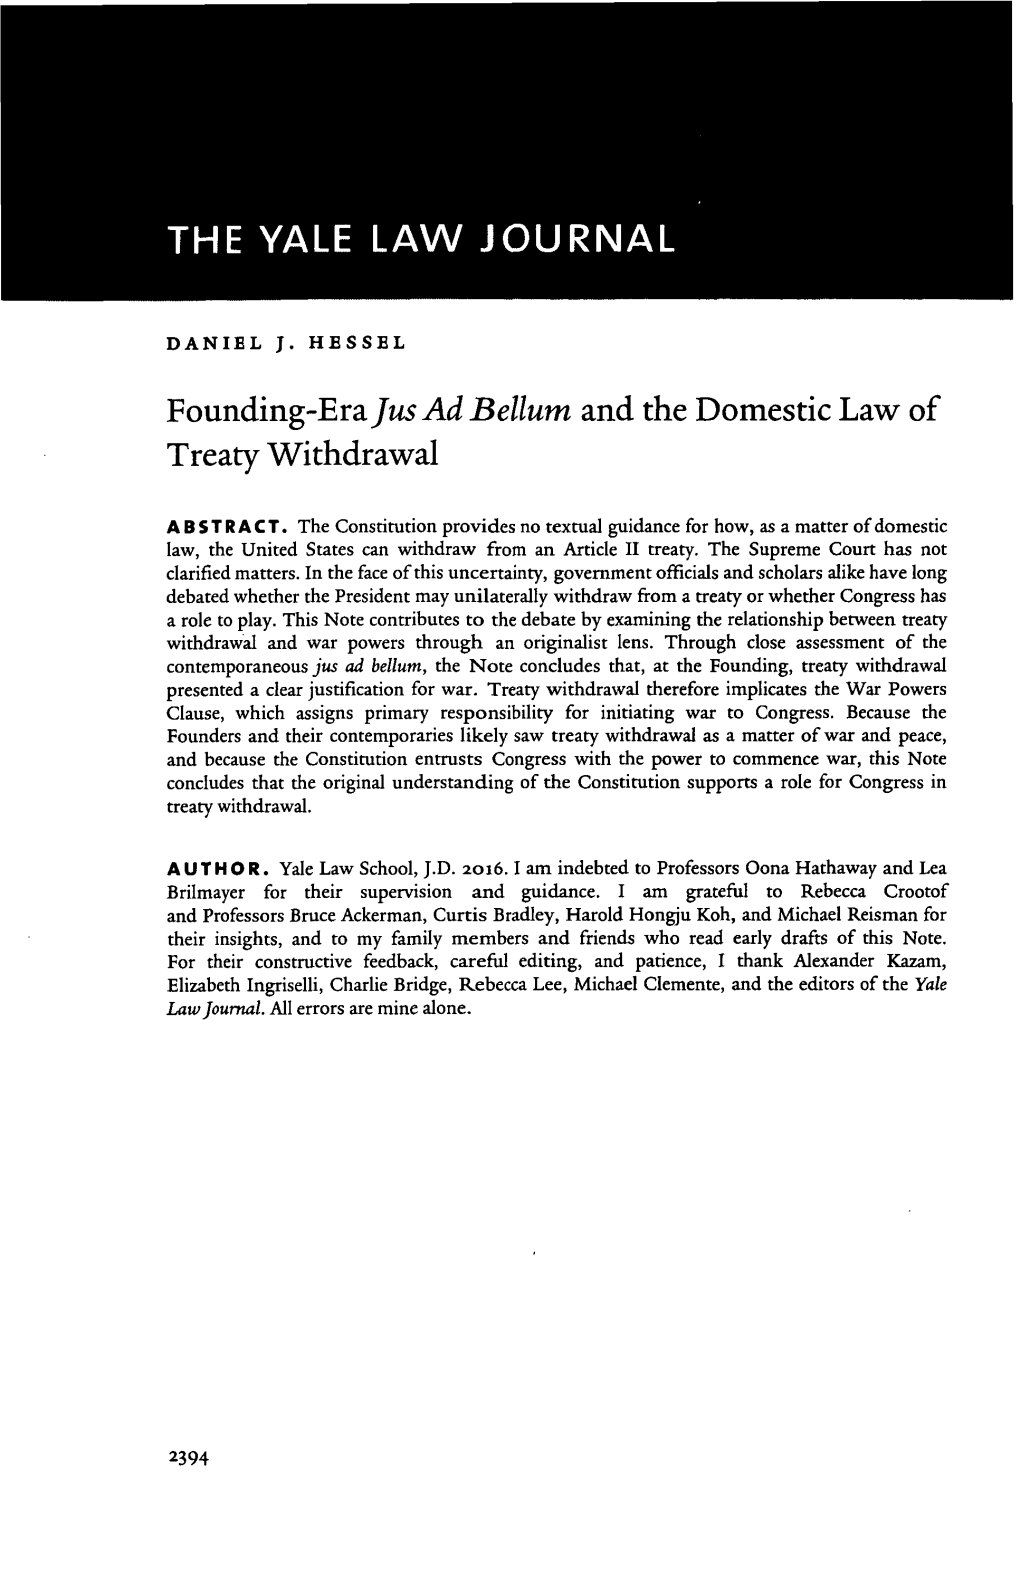 Founding-Era Jus Ad Bellum and the Domestic Law of Treaty Withdrawal